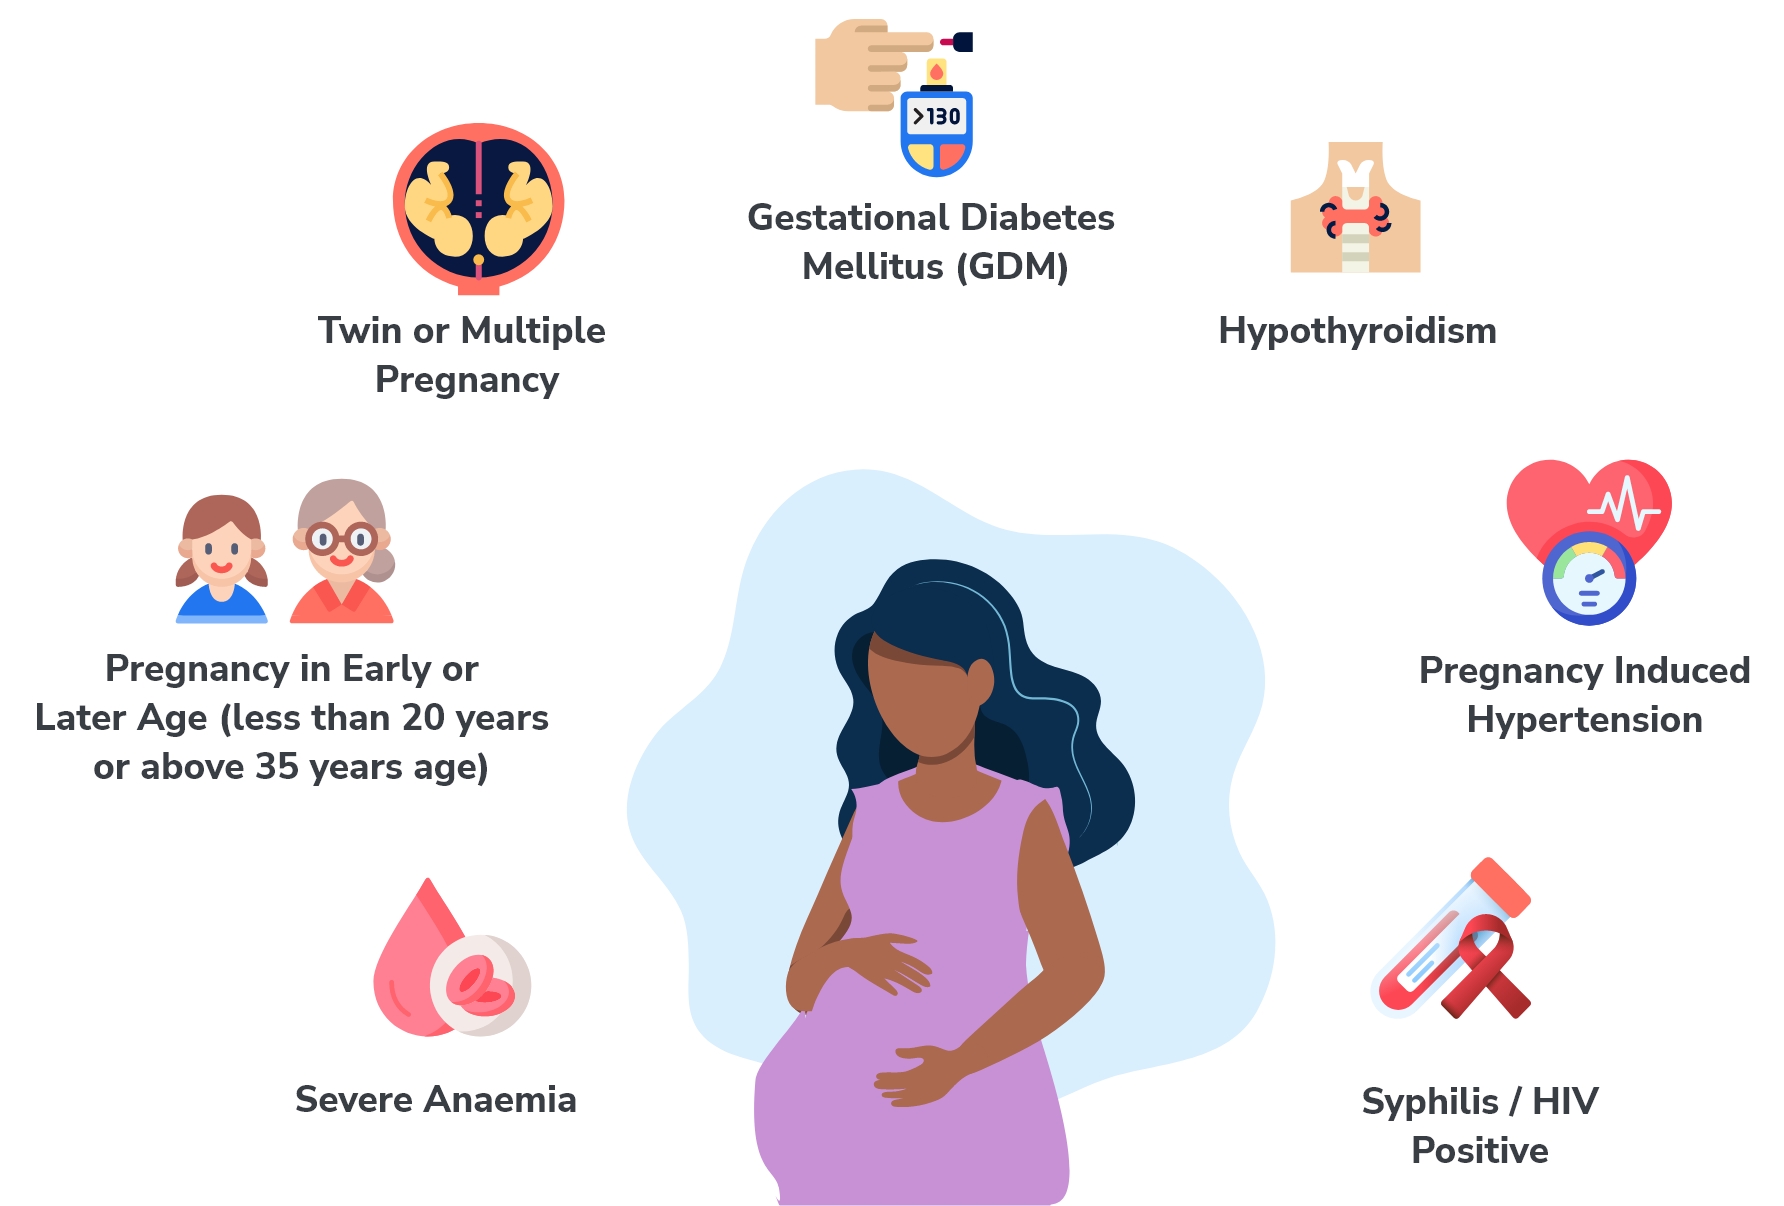 A 3D vector illustration featuring a pregnant woman in the middle and many small health related icons around her